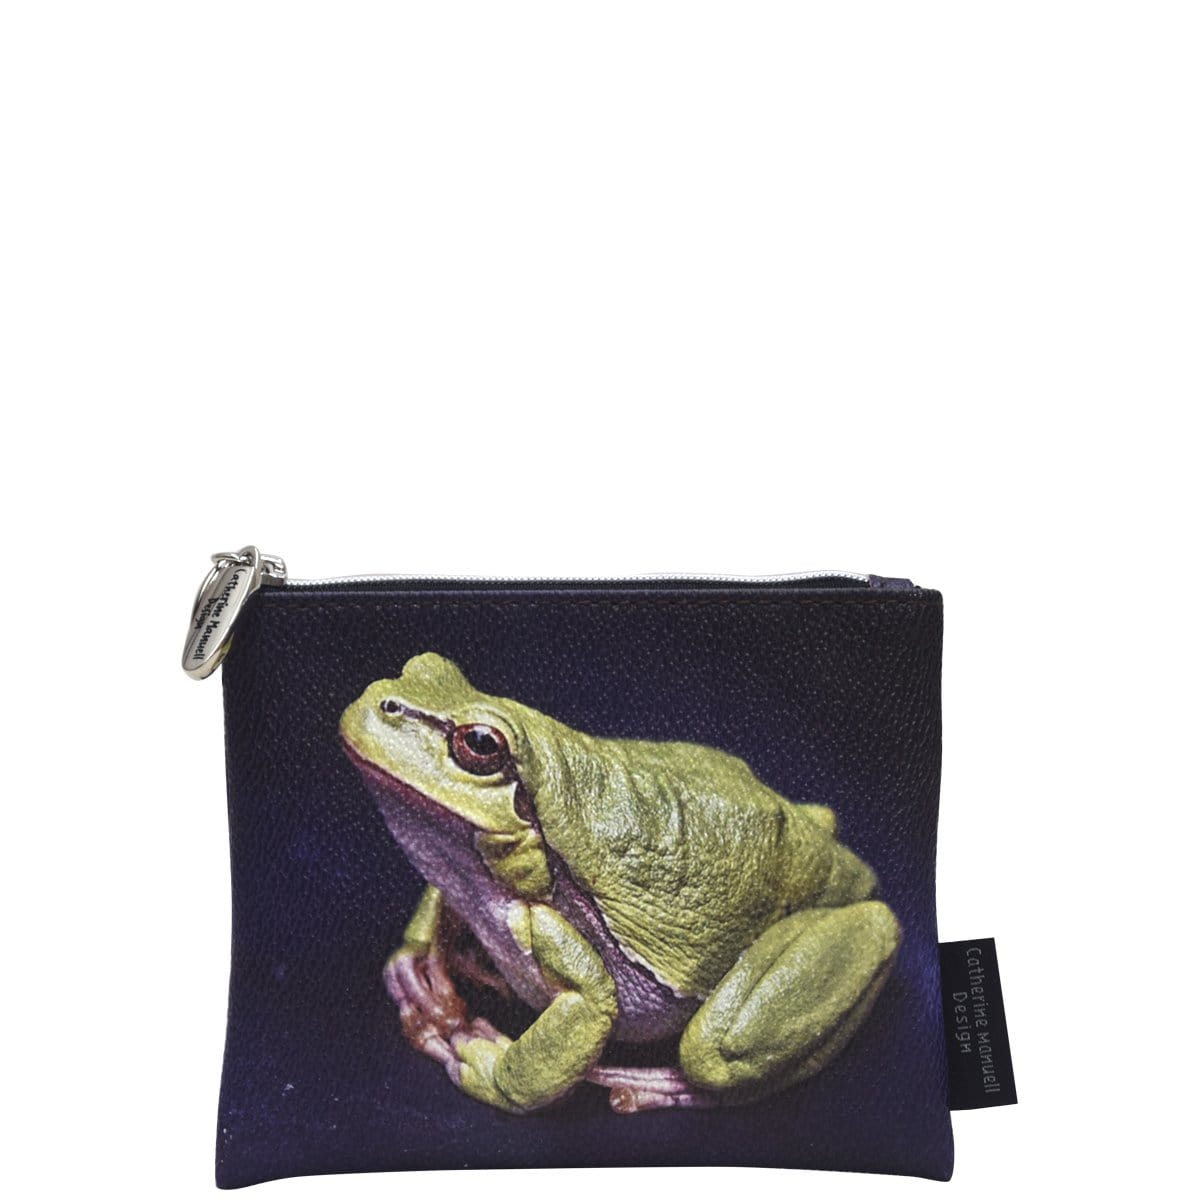 Everyday Purse - Frog